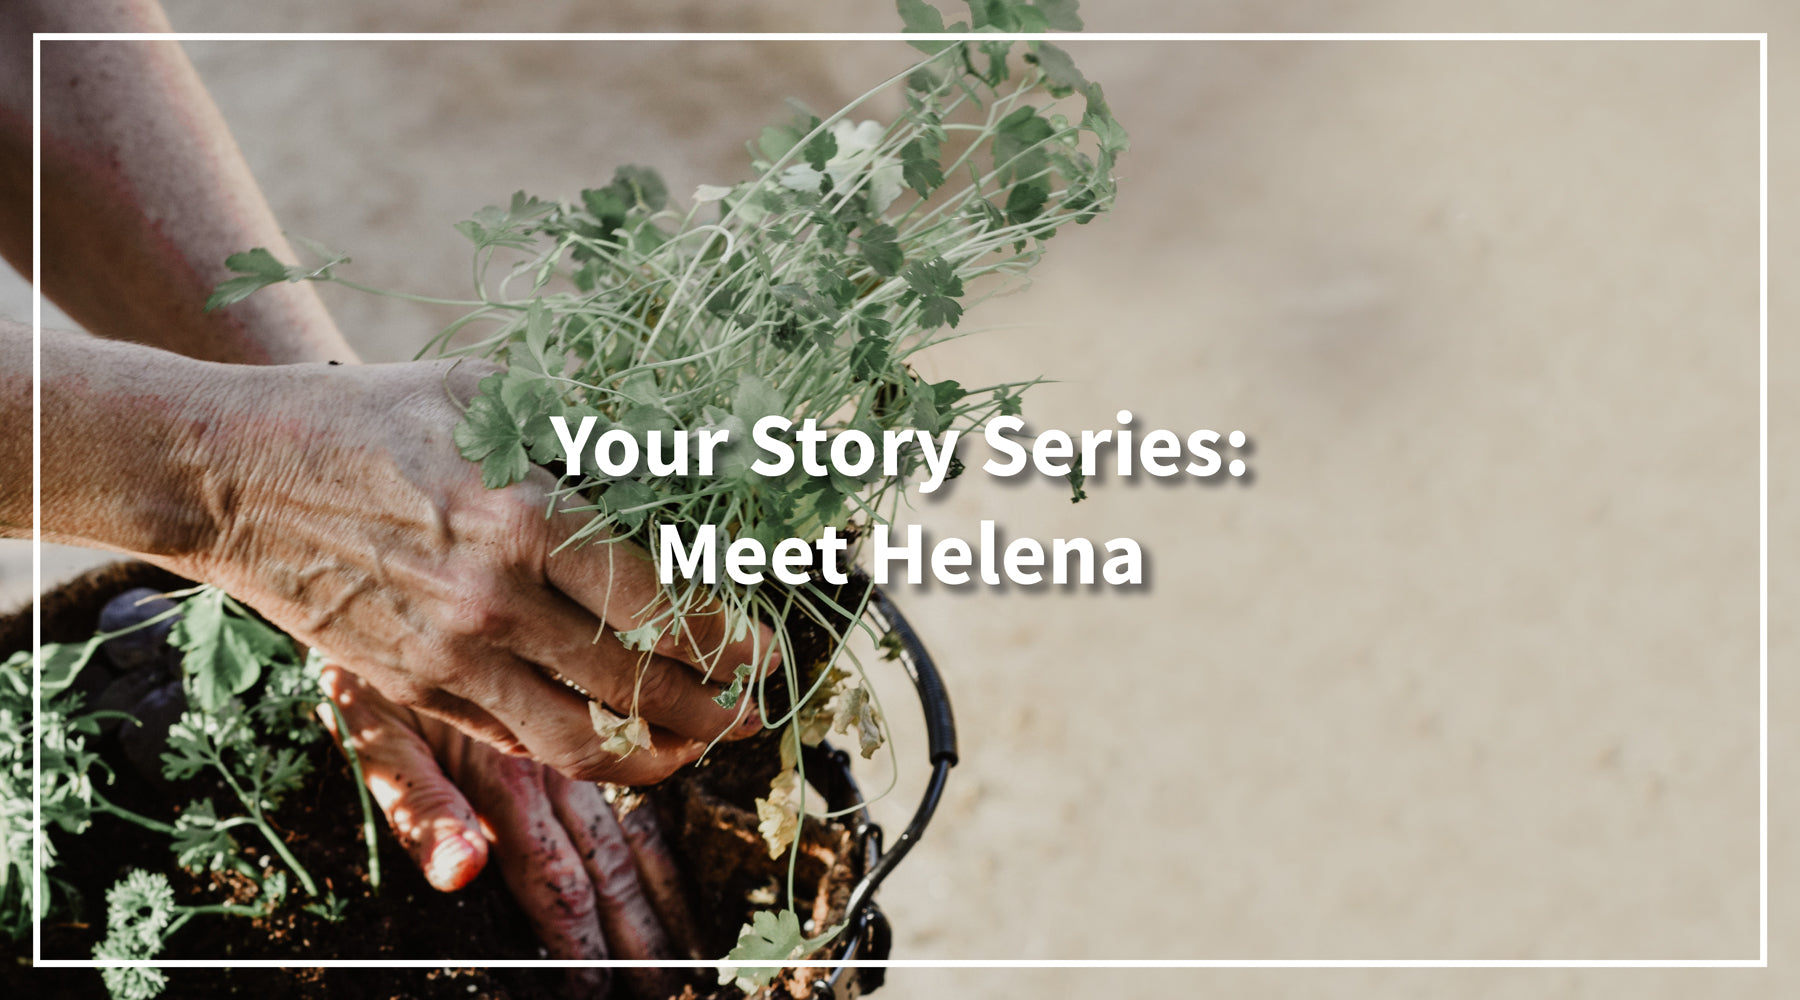 Your Story Series: Meet Helena